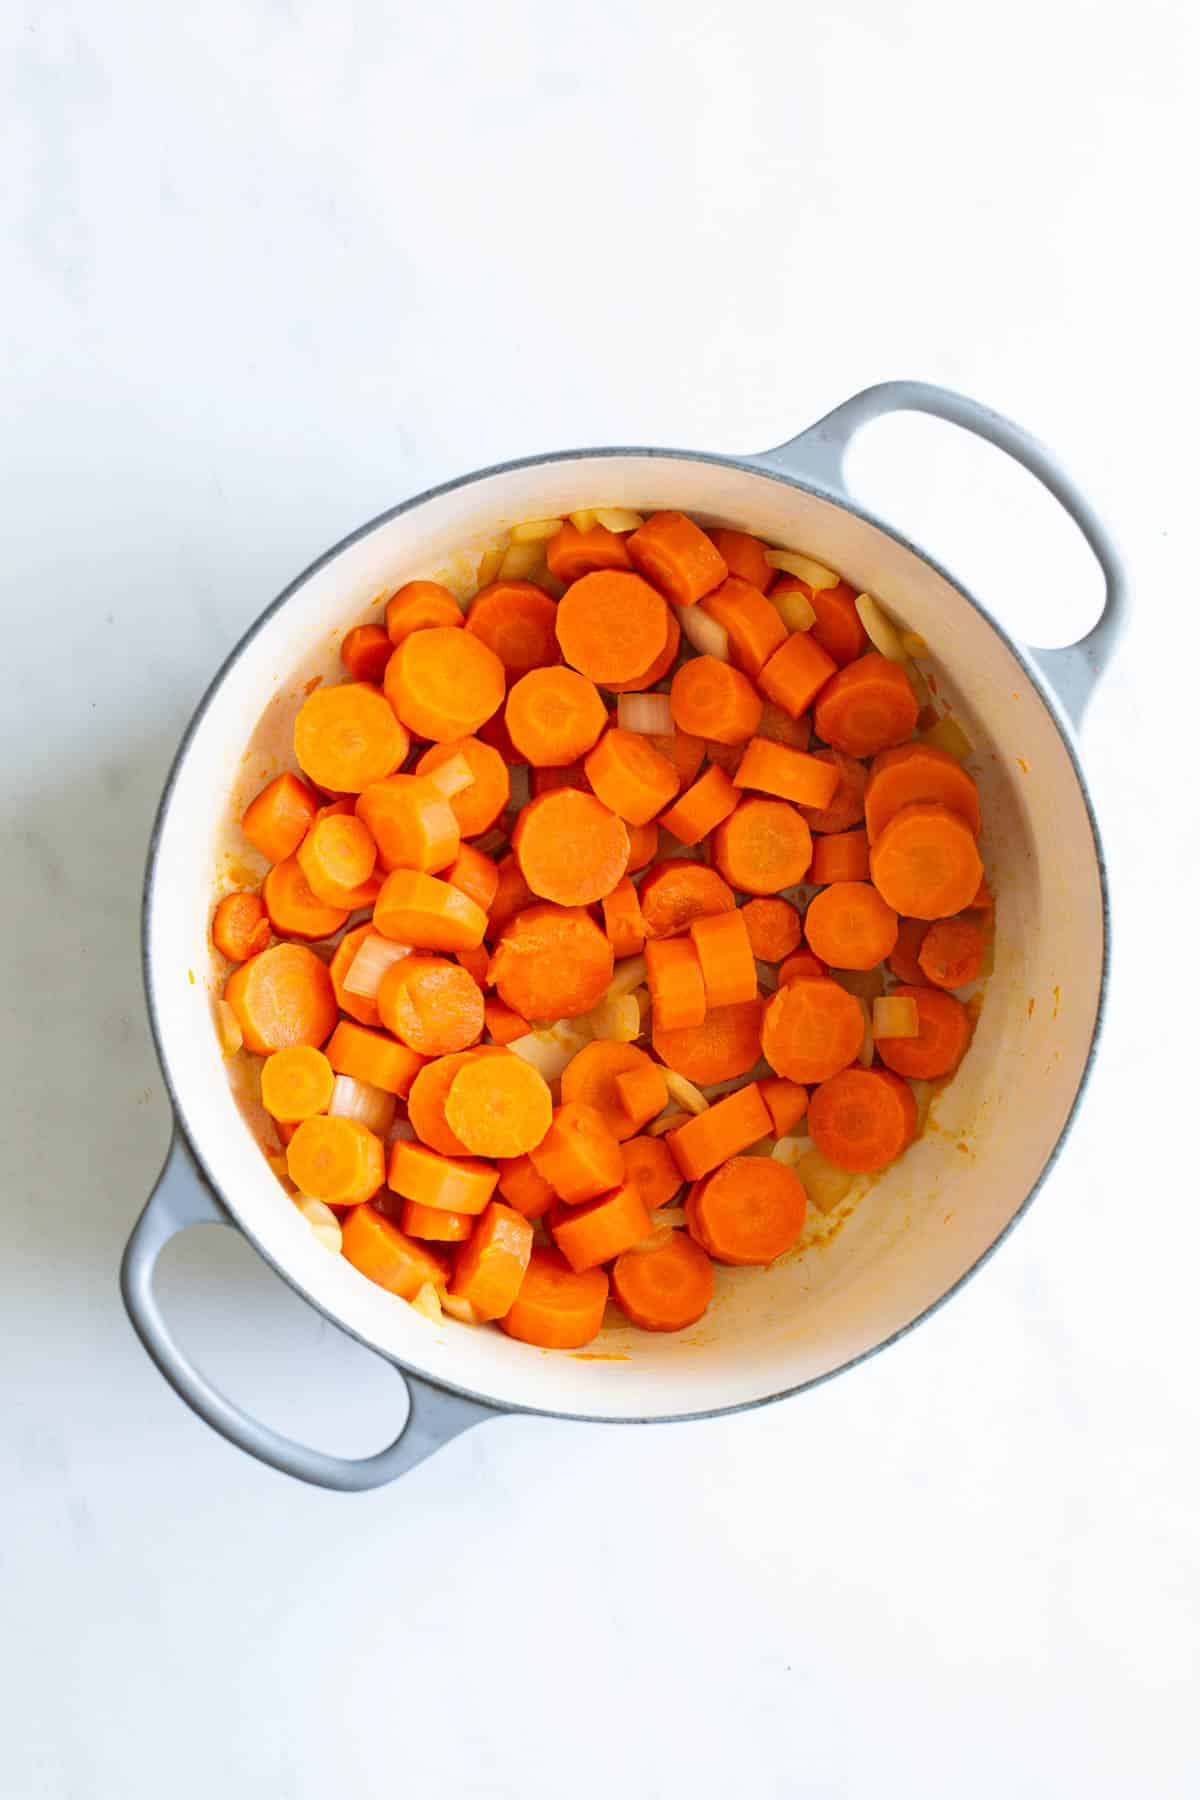 Sliced carrots in a white cooking pot.